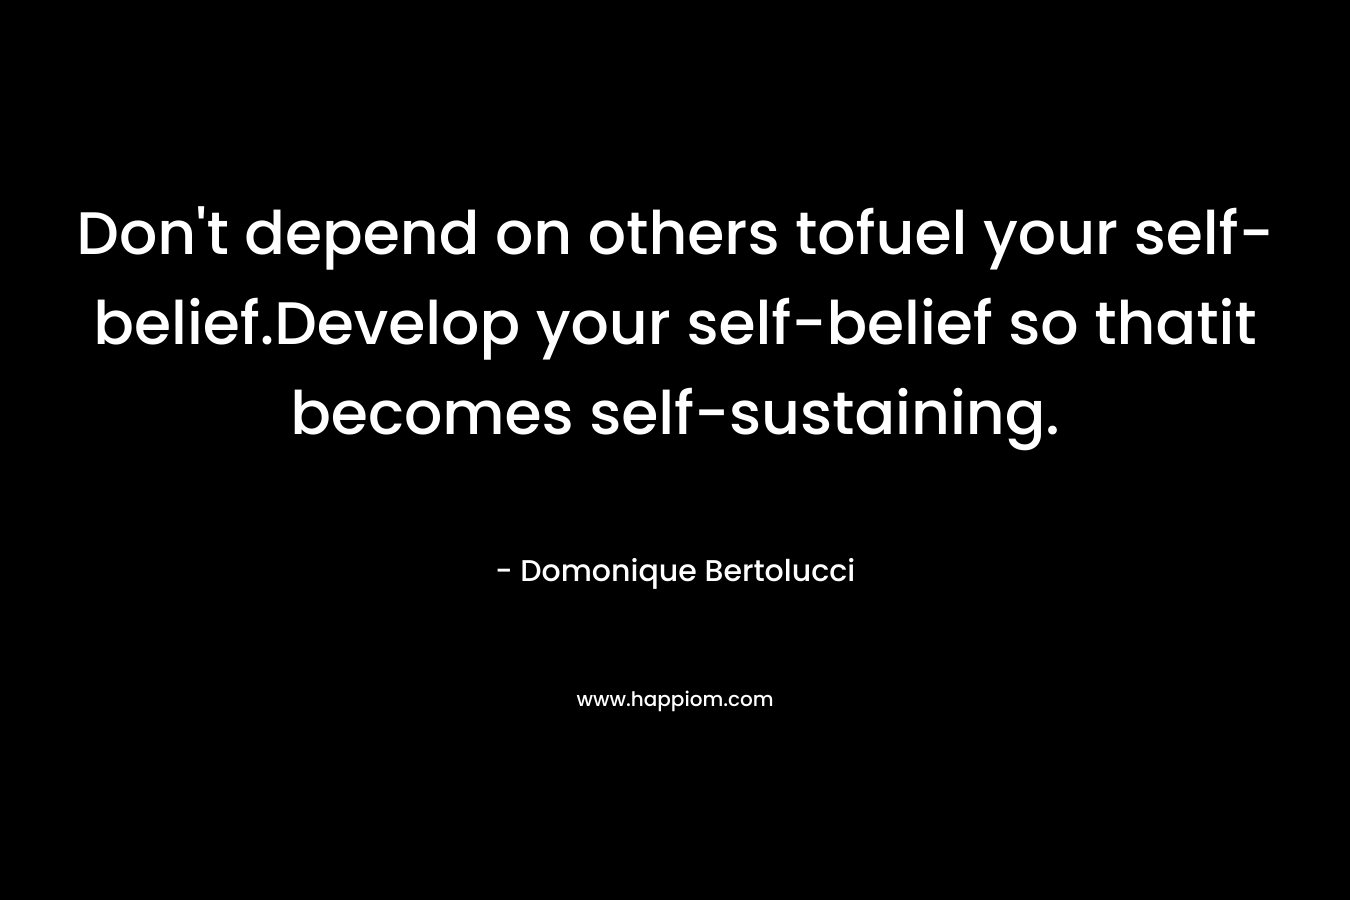 Don’t depend on others tofuel your self-belief.Develop your self-belief so thatit becomes self-sustaining. – Domonique Bertolucci